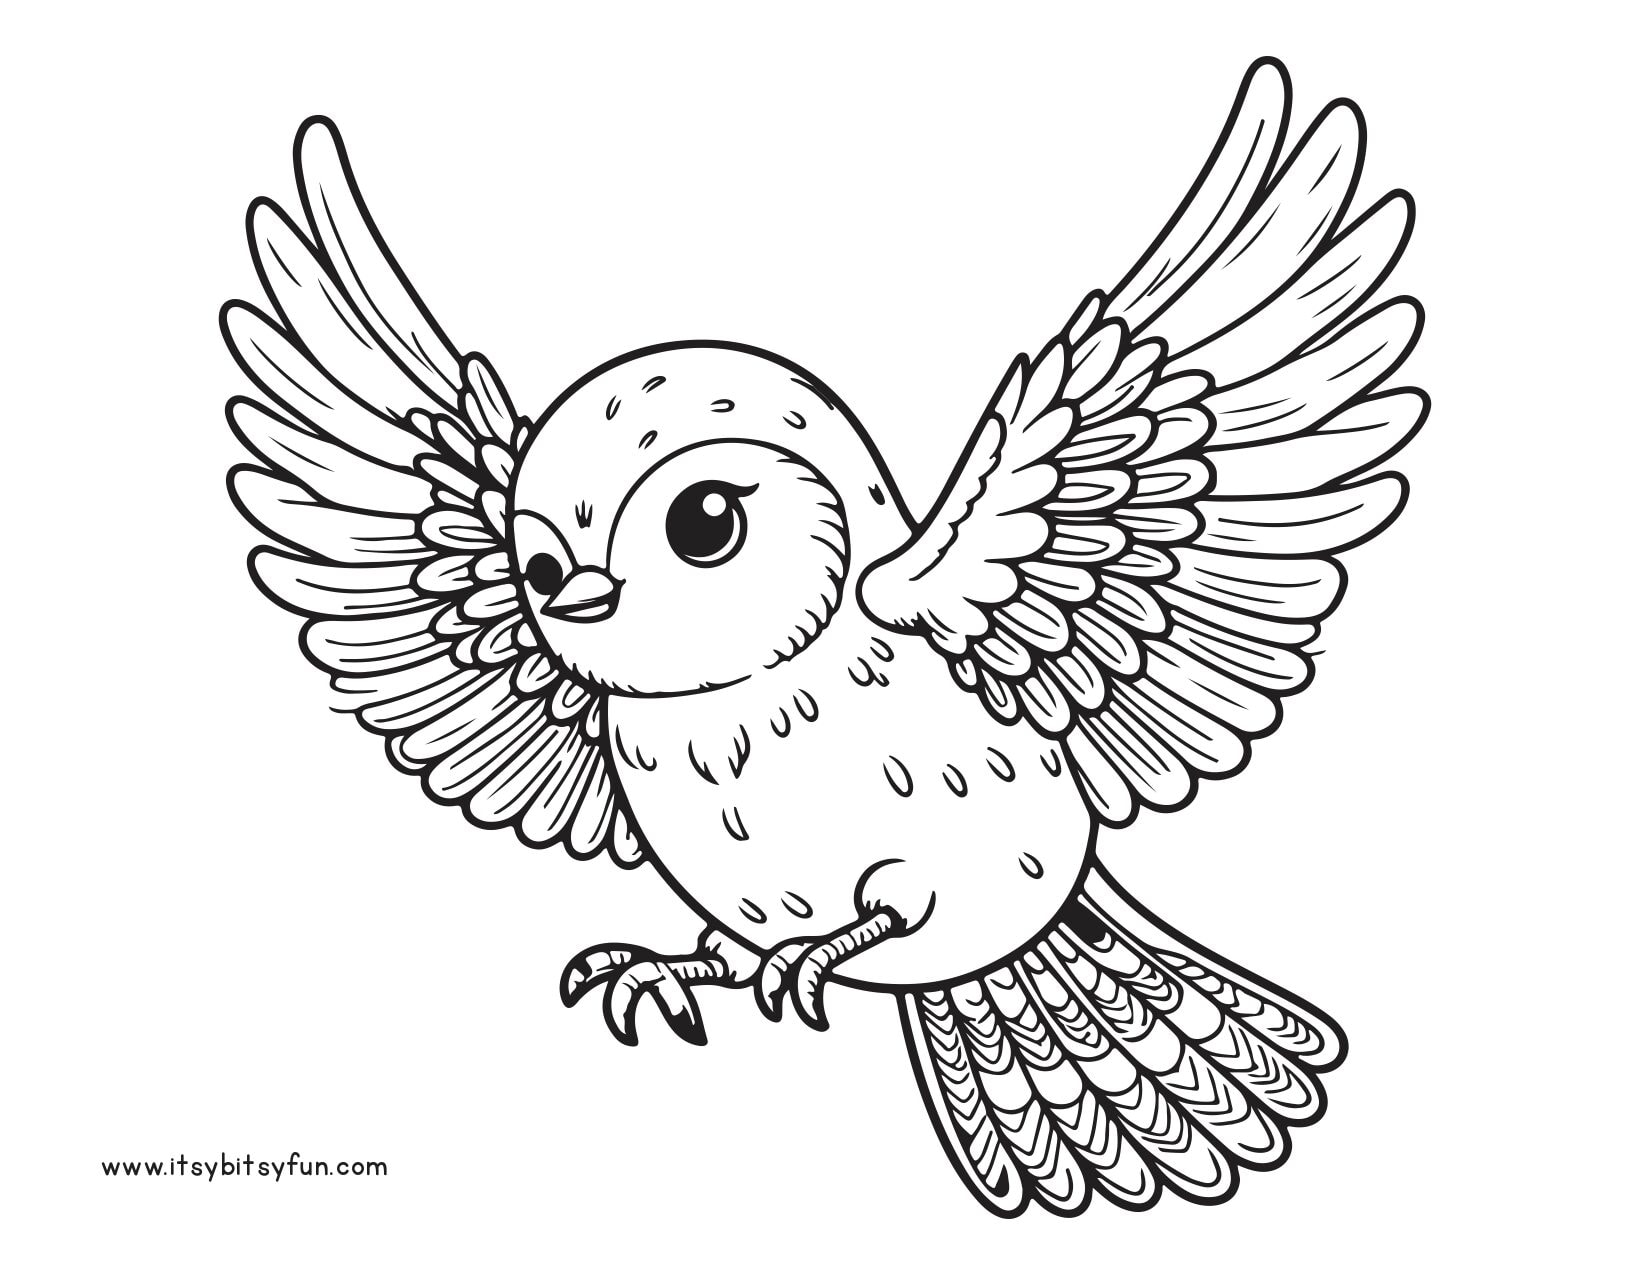 Flying owl coloring page.